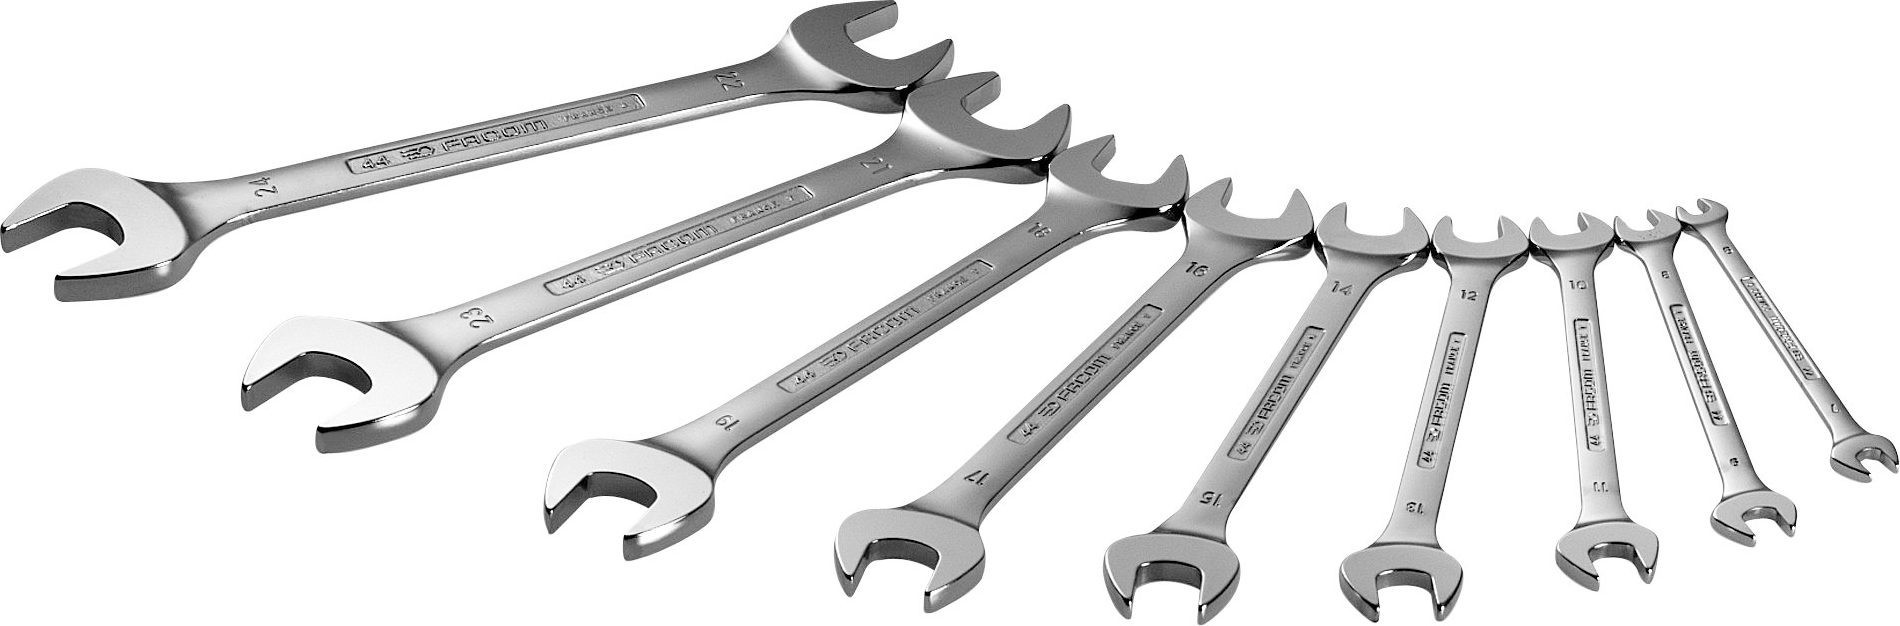 Standard Numbers for Open-End Wrenches